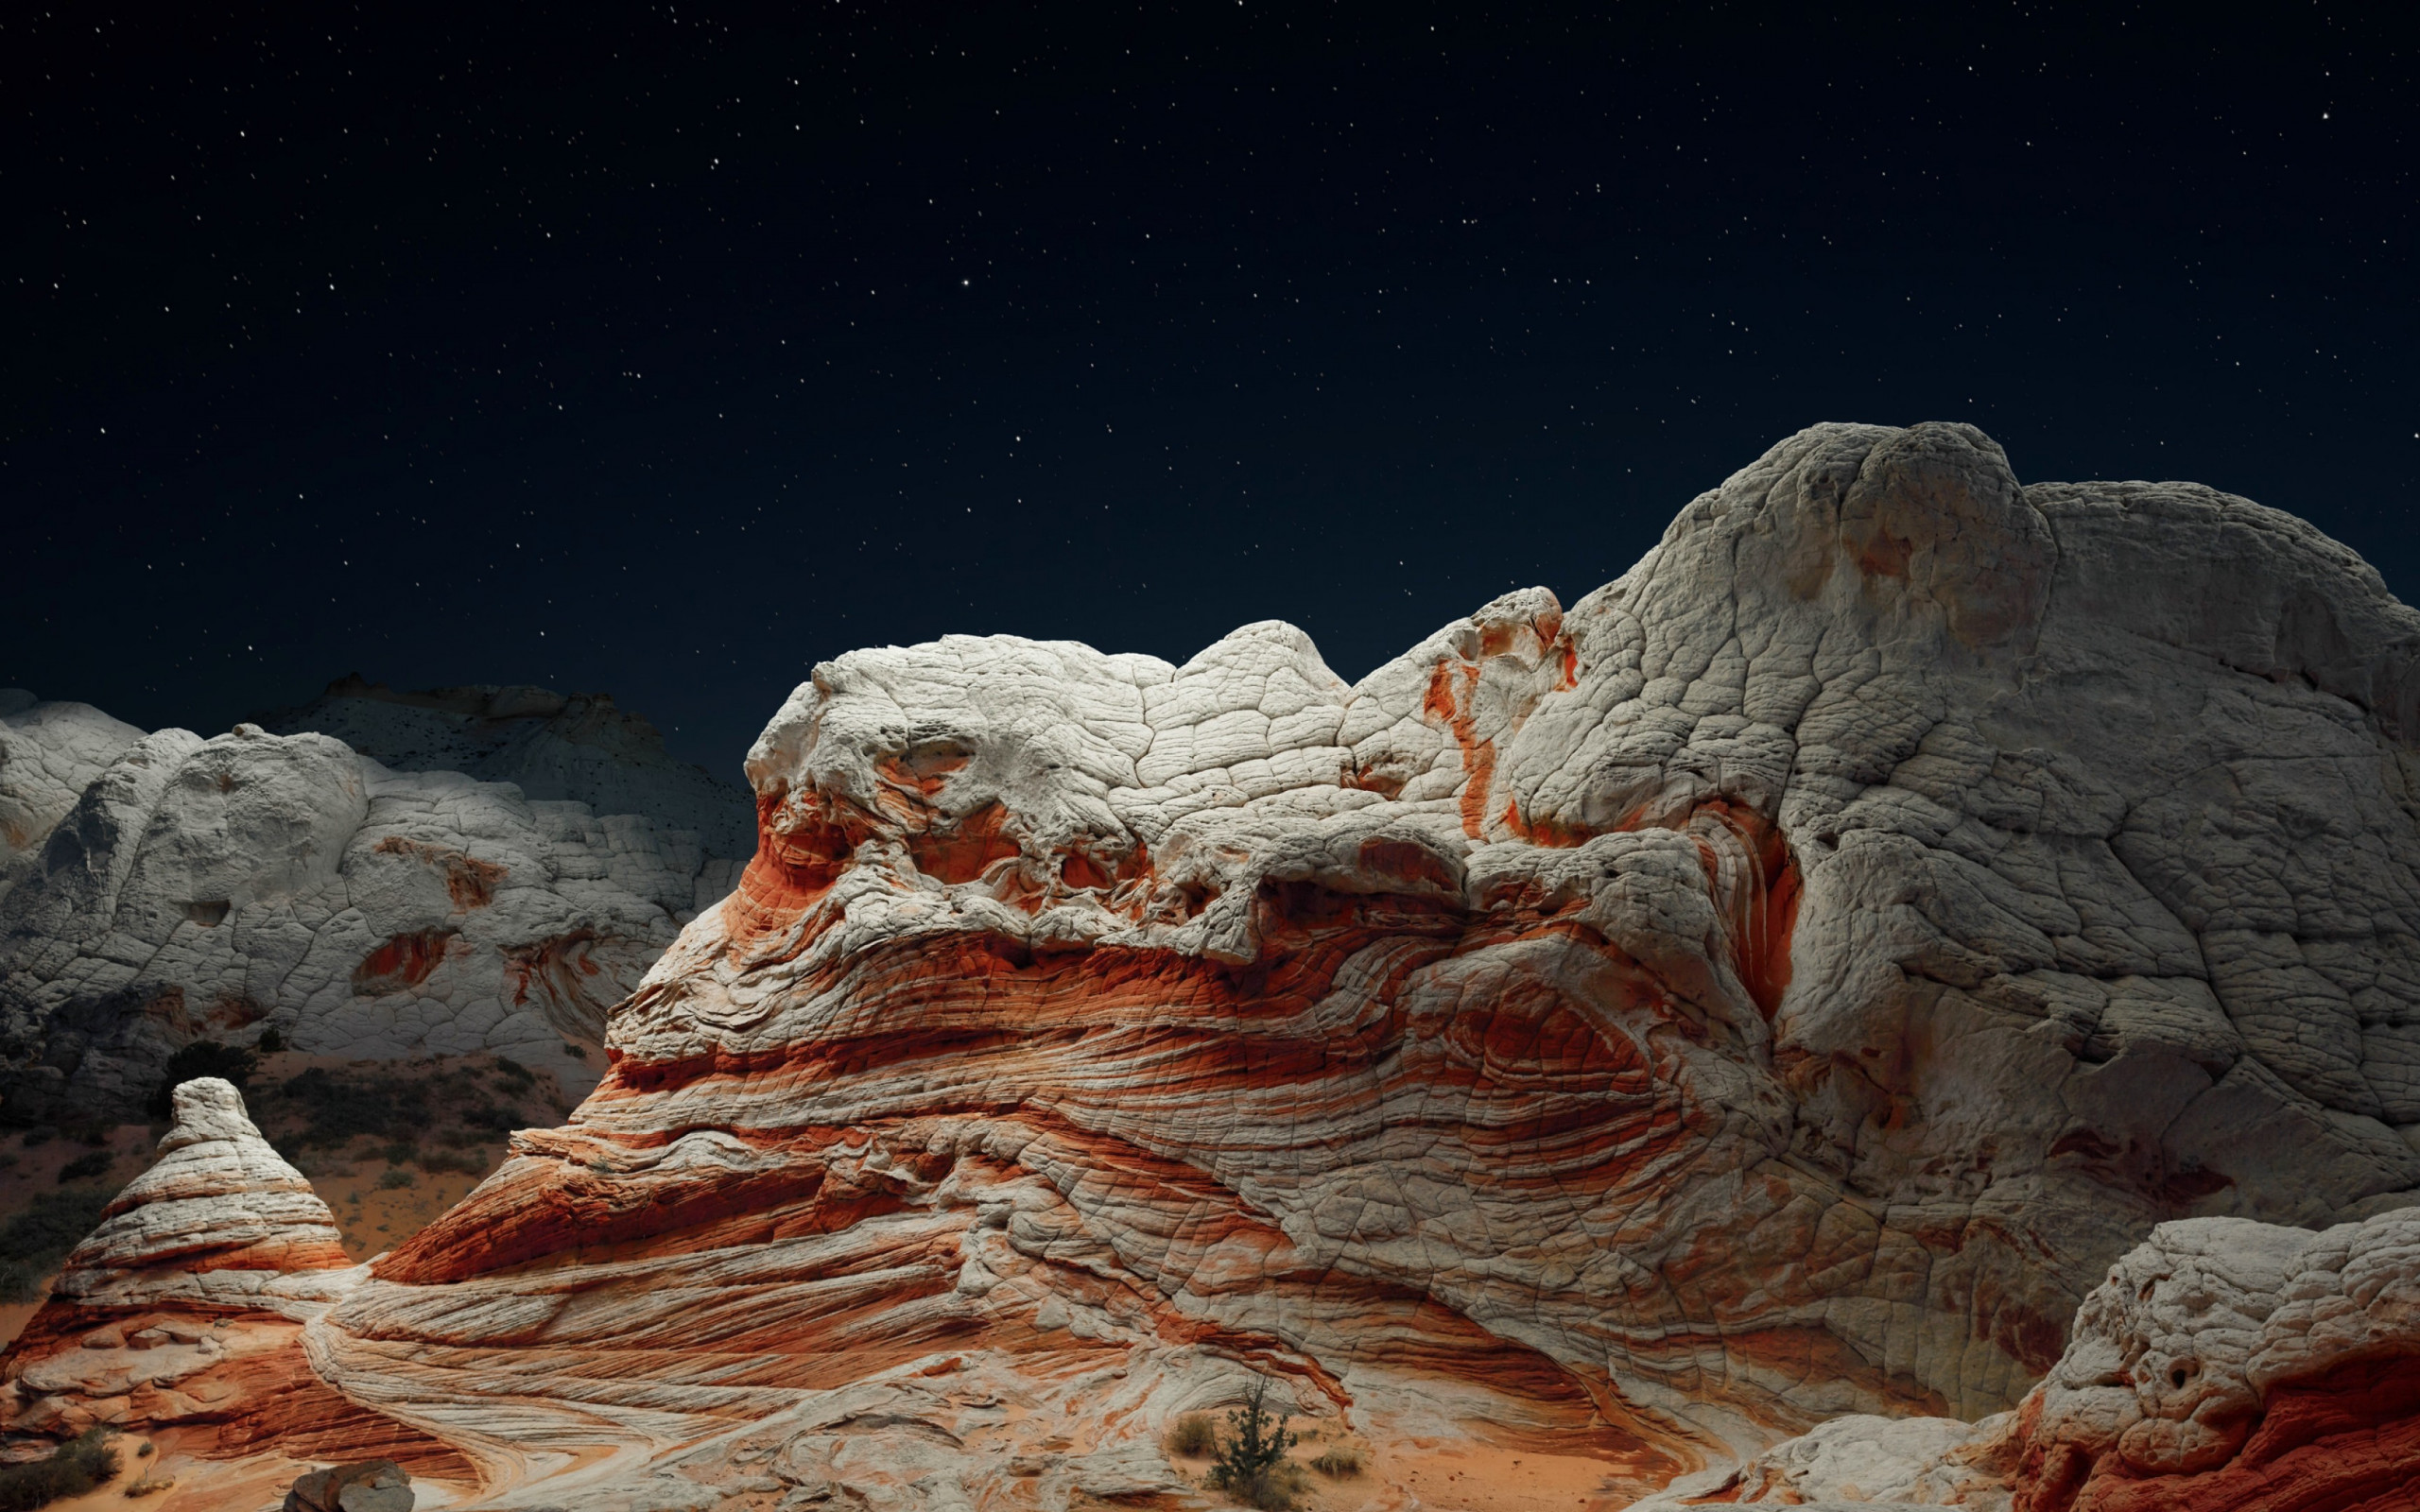 The night sky and desert valley wallpaper 2560x1600